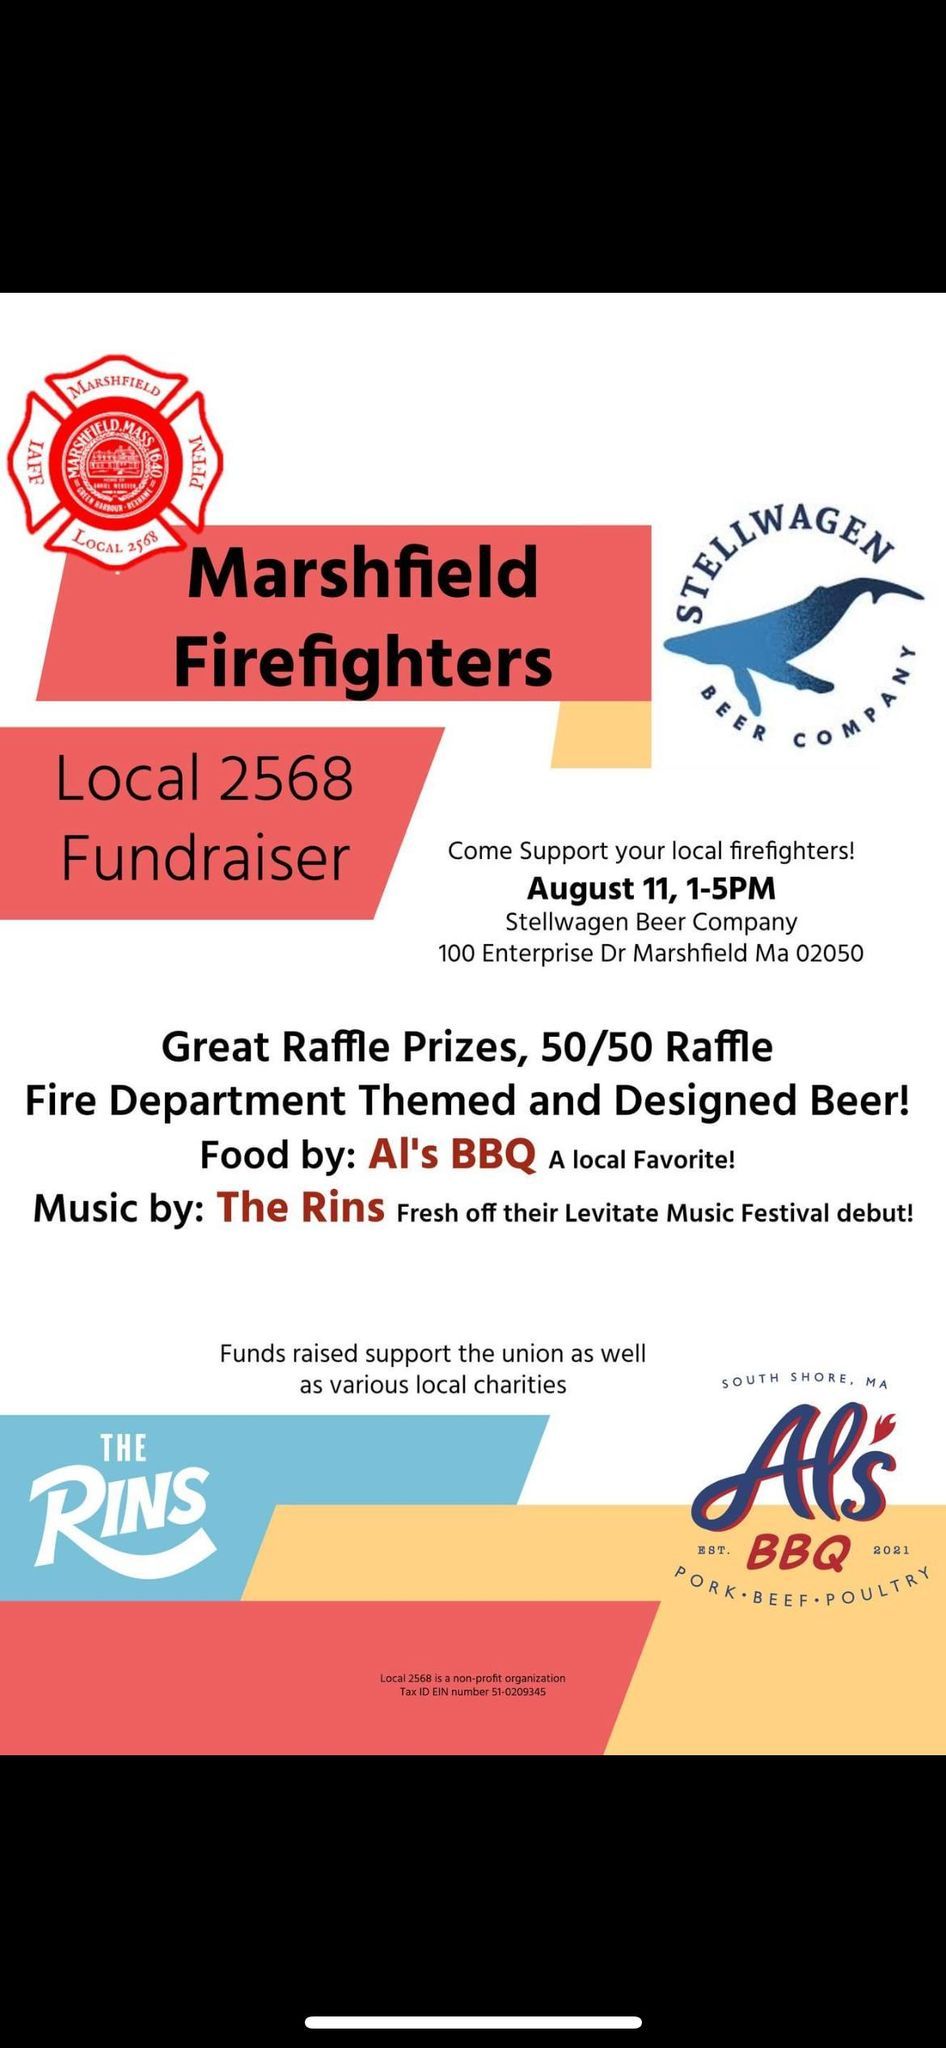 Marshfield Firefighters Local 2568 Fundraiser and Beer Release Party